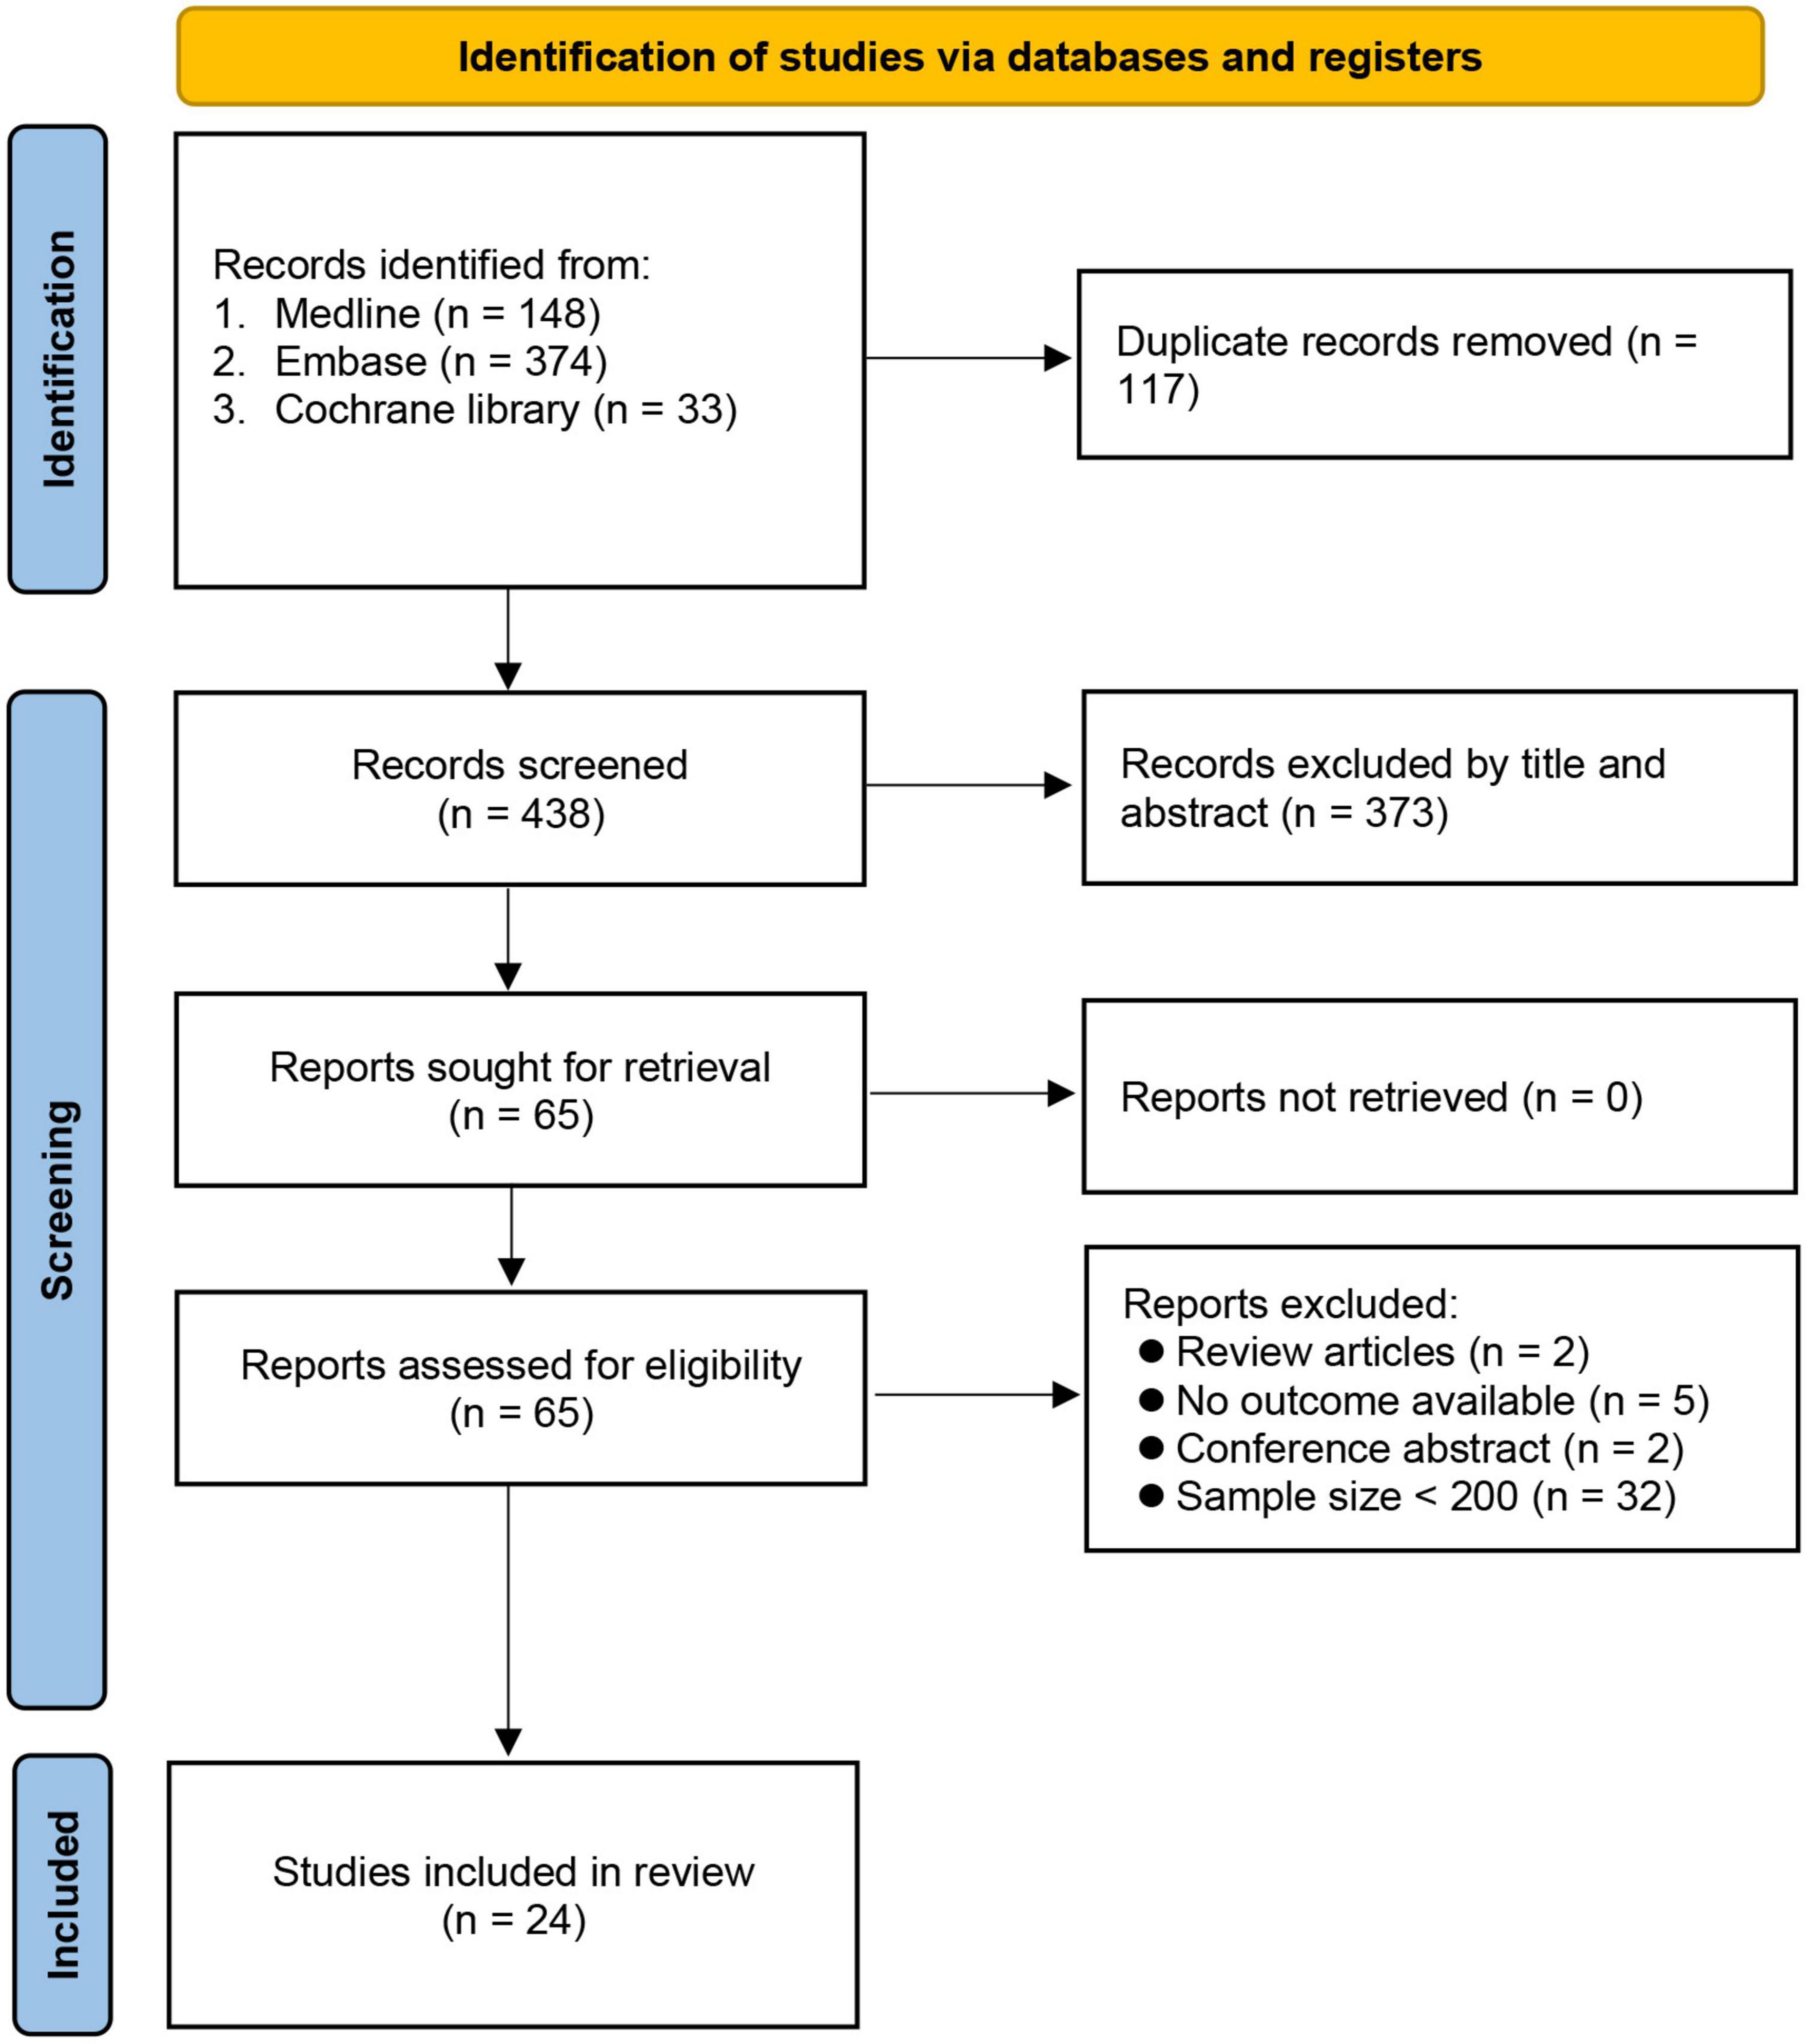 Conscious sedation/monitored anesthesia care versus general anesthesia in patients undergoing transcatheter aortic valve replacement: A meta-analysis